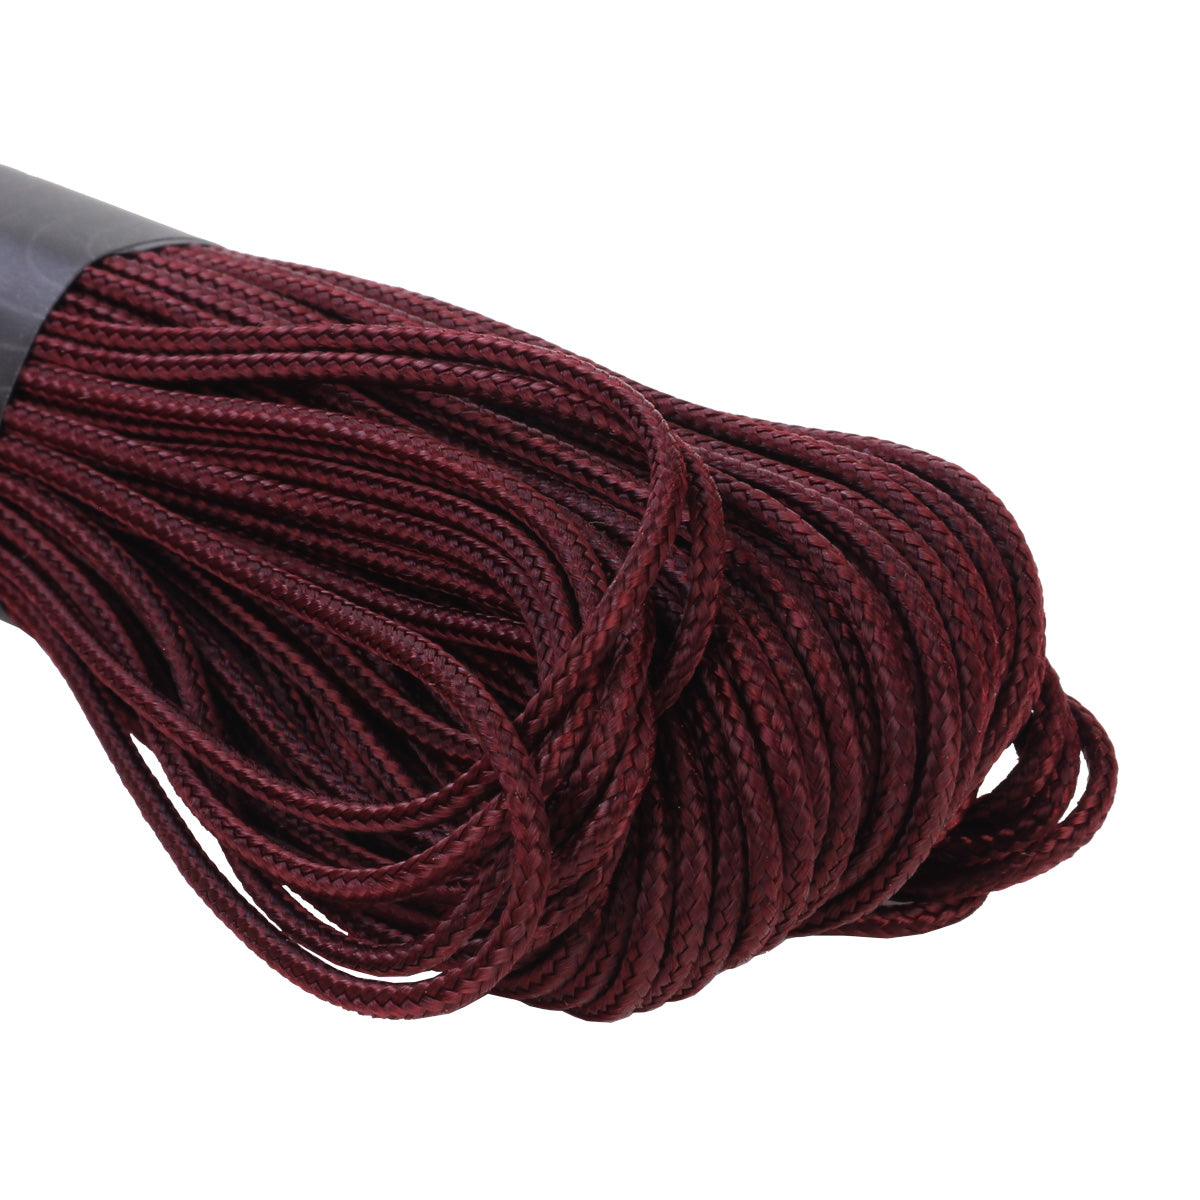 Burgundy Paracord Type I ca 2 mm accessory cord